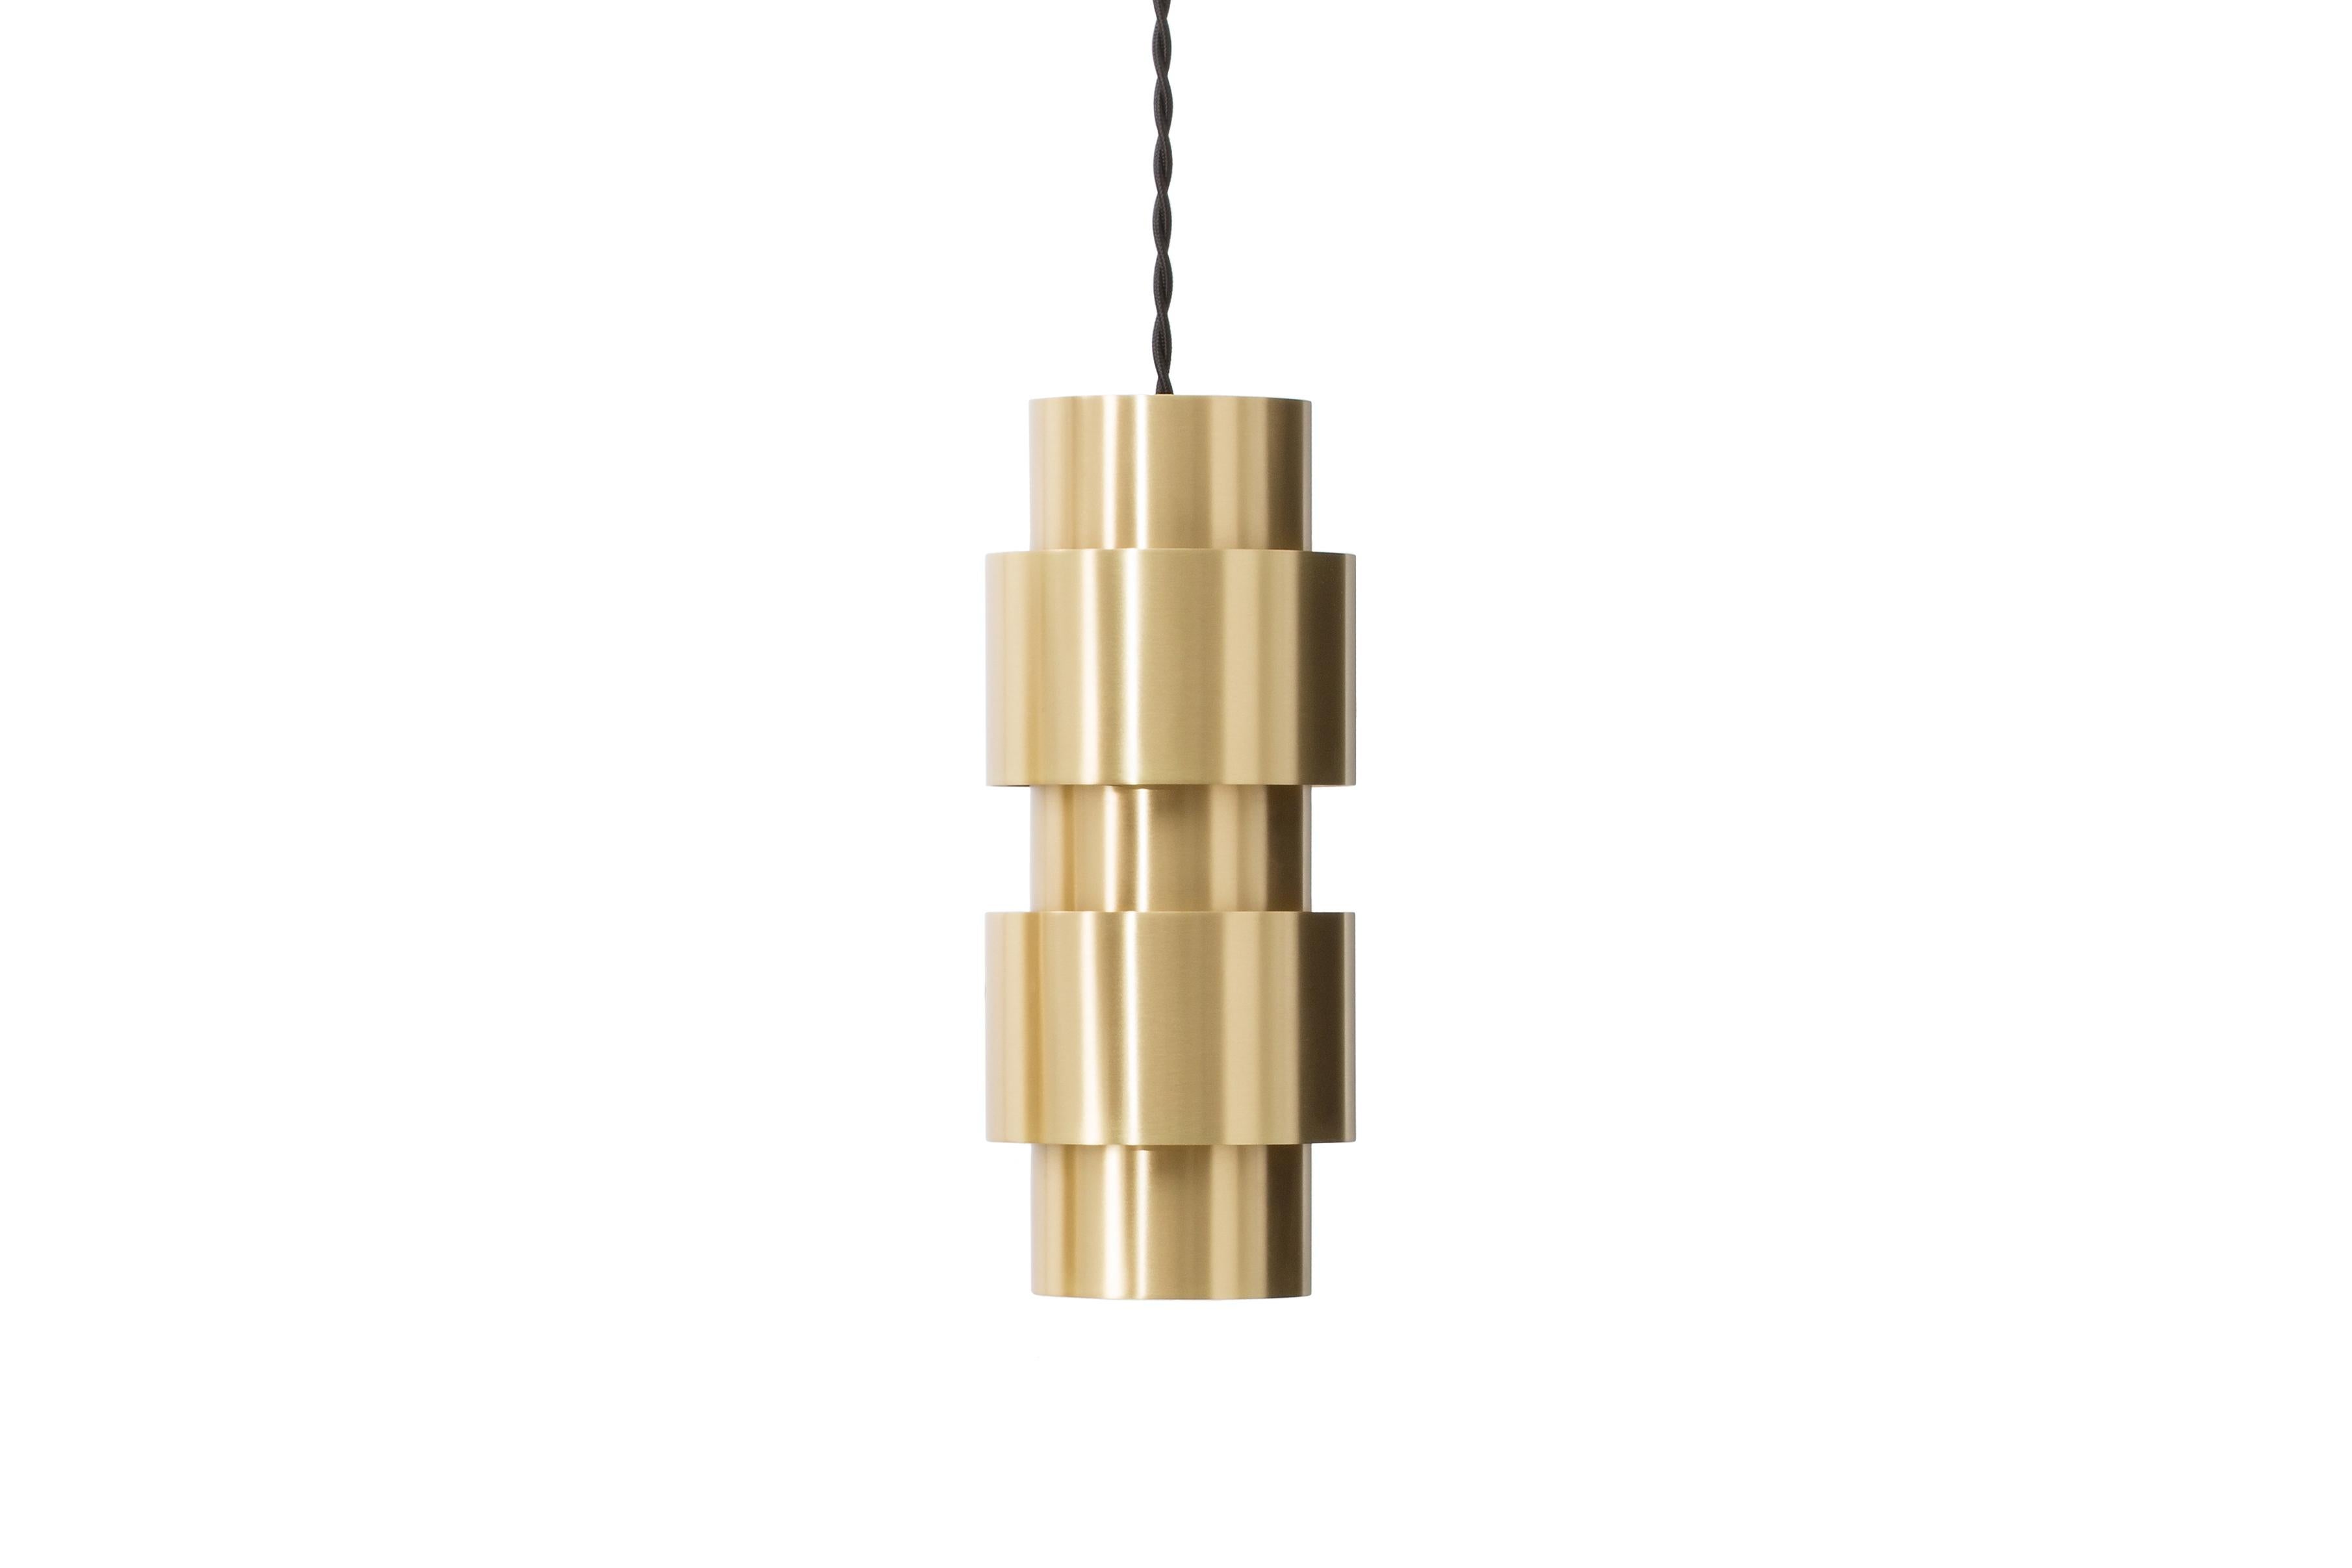 Ring pendant by CTO Lighting
Materials: satin brass with black silk braided flex
Also available in bronze and satin brass with black silk braided flex
Dimensions: H 24 x W 10 cm 

All our lamps can be wired according to each country. If sold to the